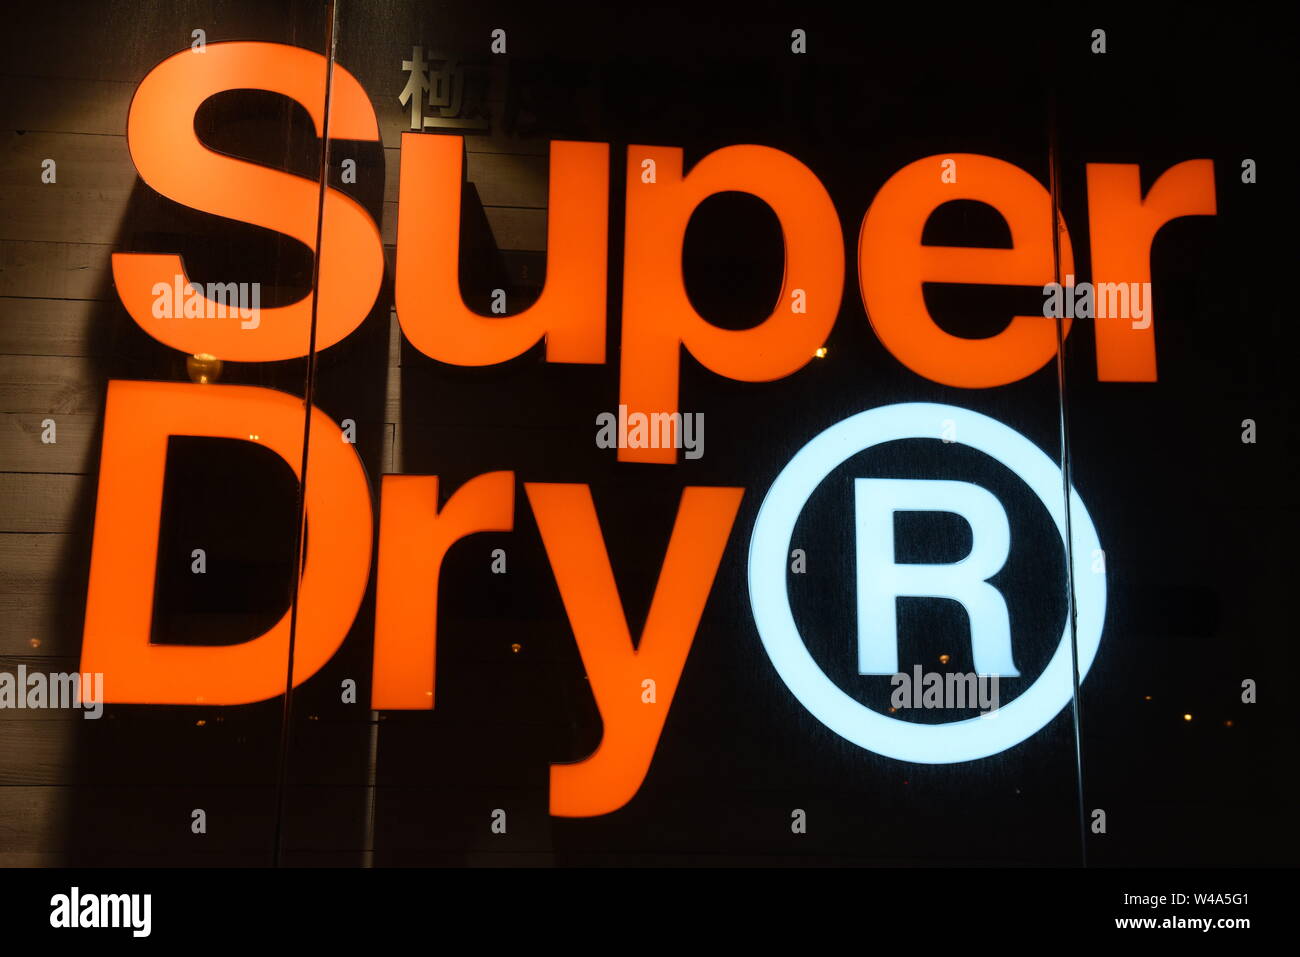 https://c8.alamy.com/comp/W4A5G1/barcelona-spain-19th-july-2019-the-superdry-logo-seen-at-a-super-dry-store-in-madrid-credit-john-milnersopa-imageszuma-wirealamy-live-news-W4A5G1.jpg